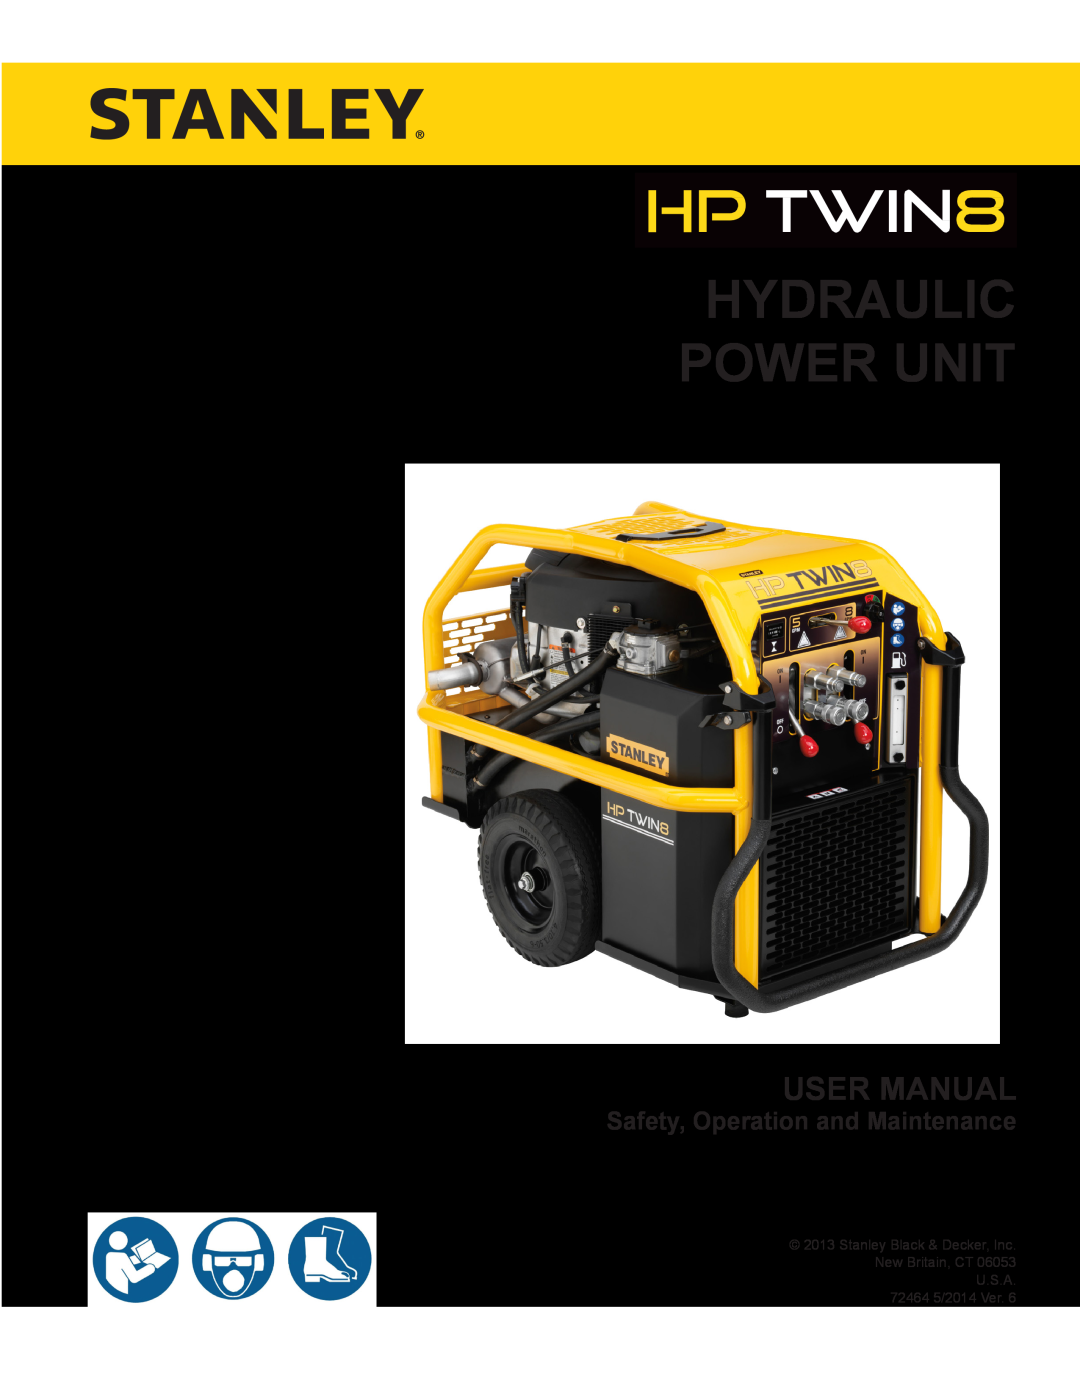 Stanley Black & Decker HP TWIN8 manual User Manual, Safety, Operation and Maintenance, Hydraulic Power Unit 